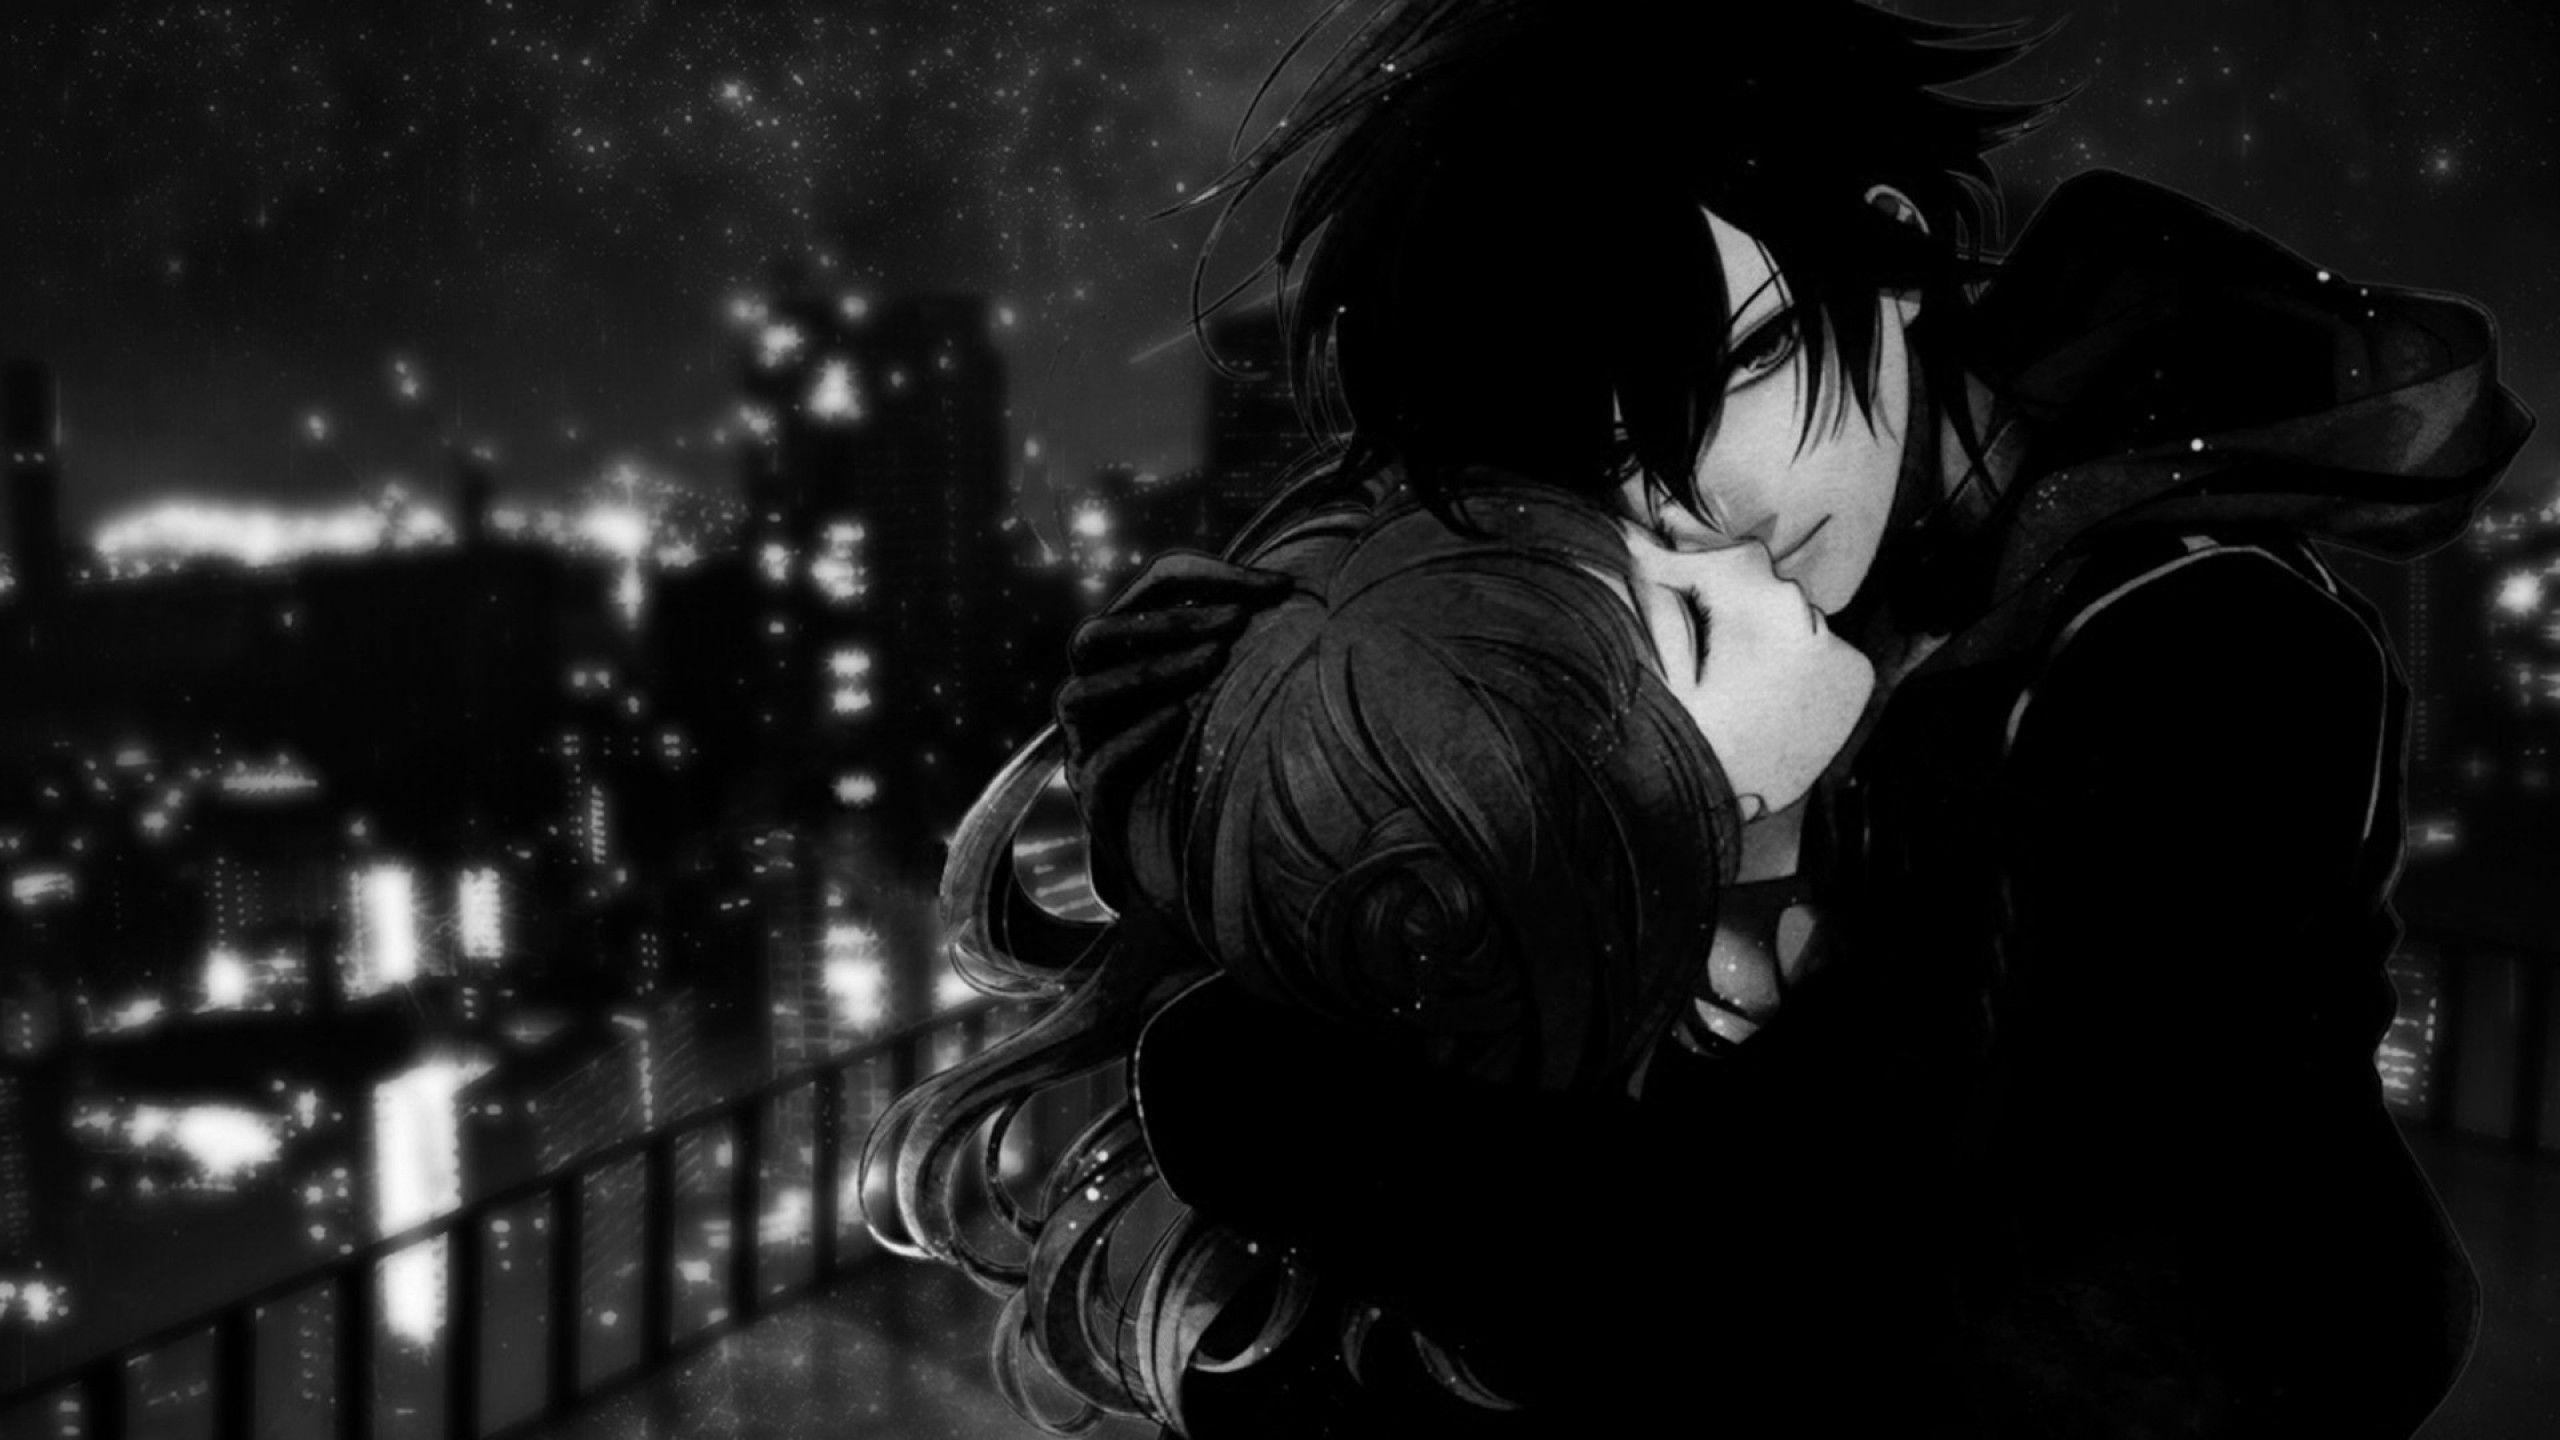 Anime Couple Romantic Wallpapers - Wallpaper Cave